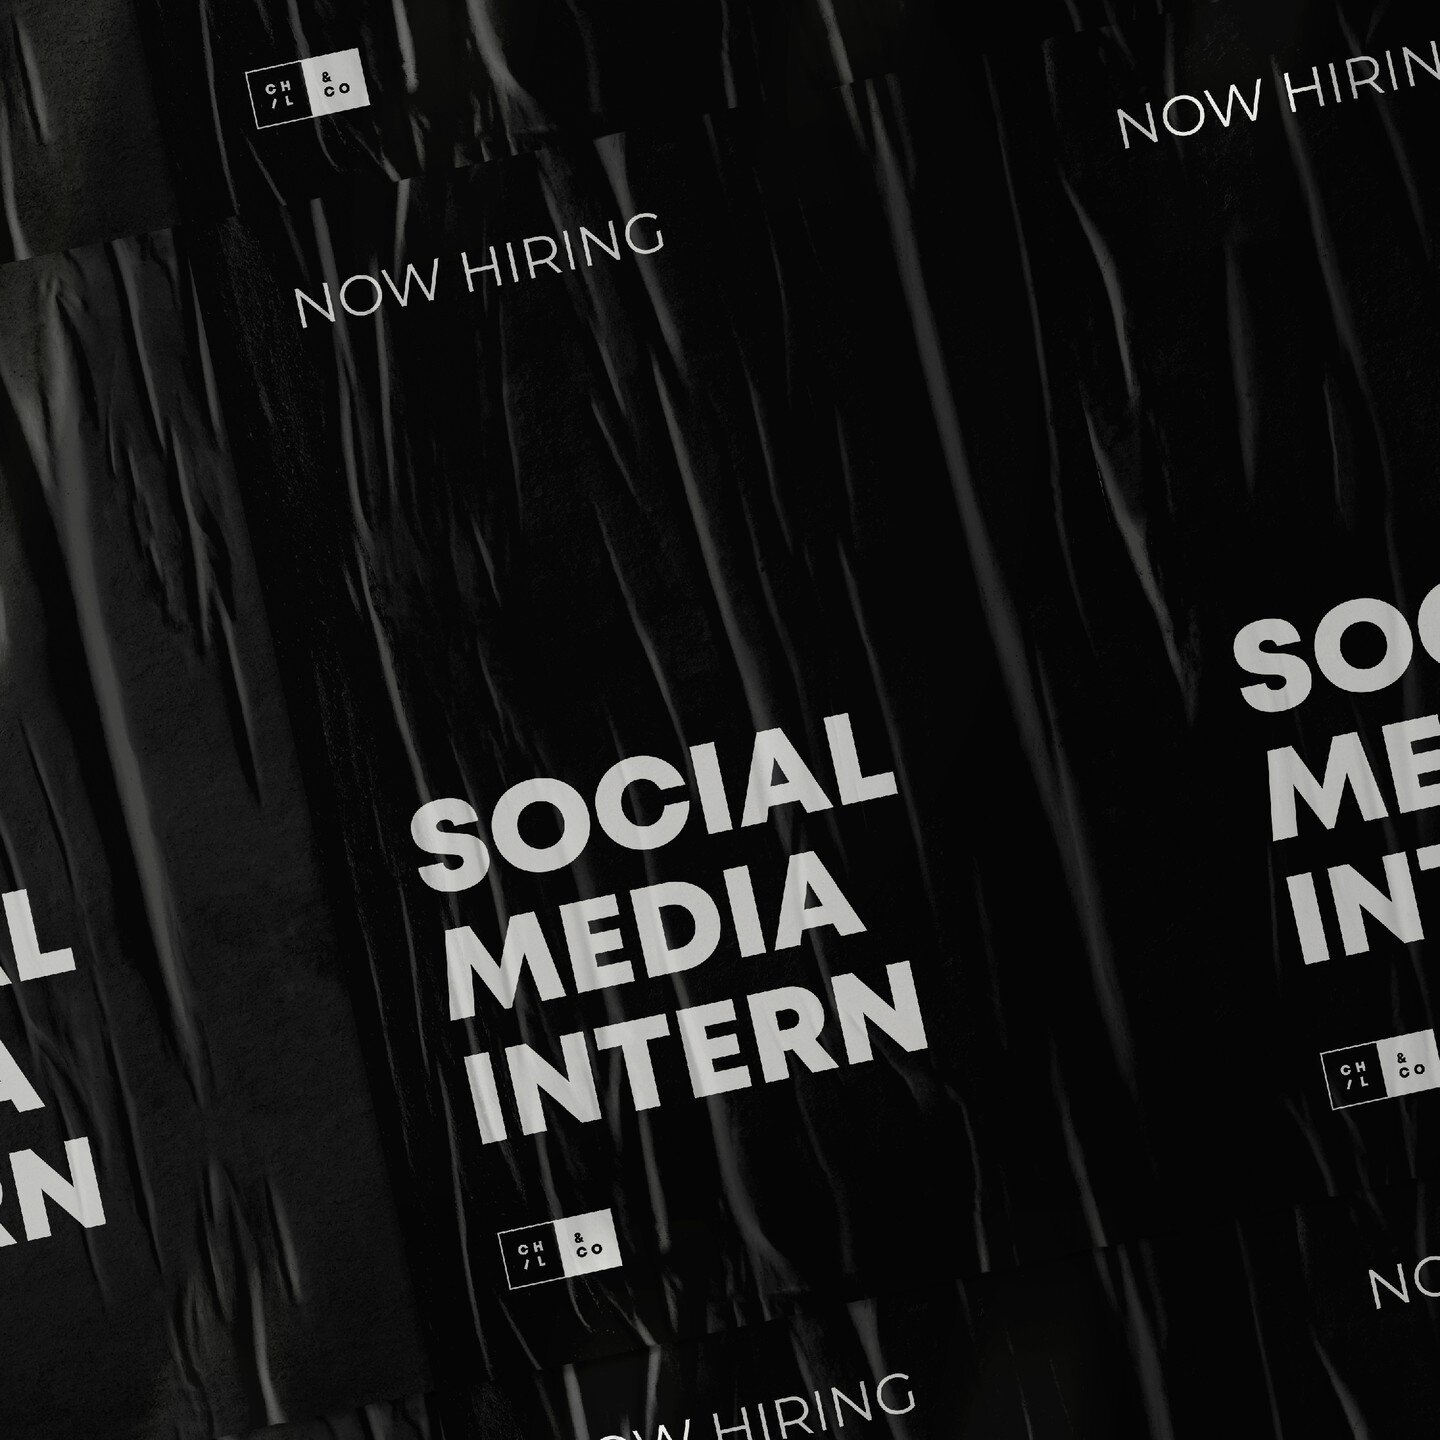 Our team is seeking a creative and self-motivated Social Media Intern to assist our creative team in helping write captions, create content, curate content calendars and help deploy posts for a variety of clients. Click the link in our bio to apply a